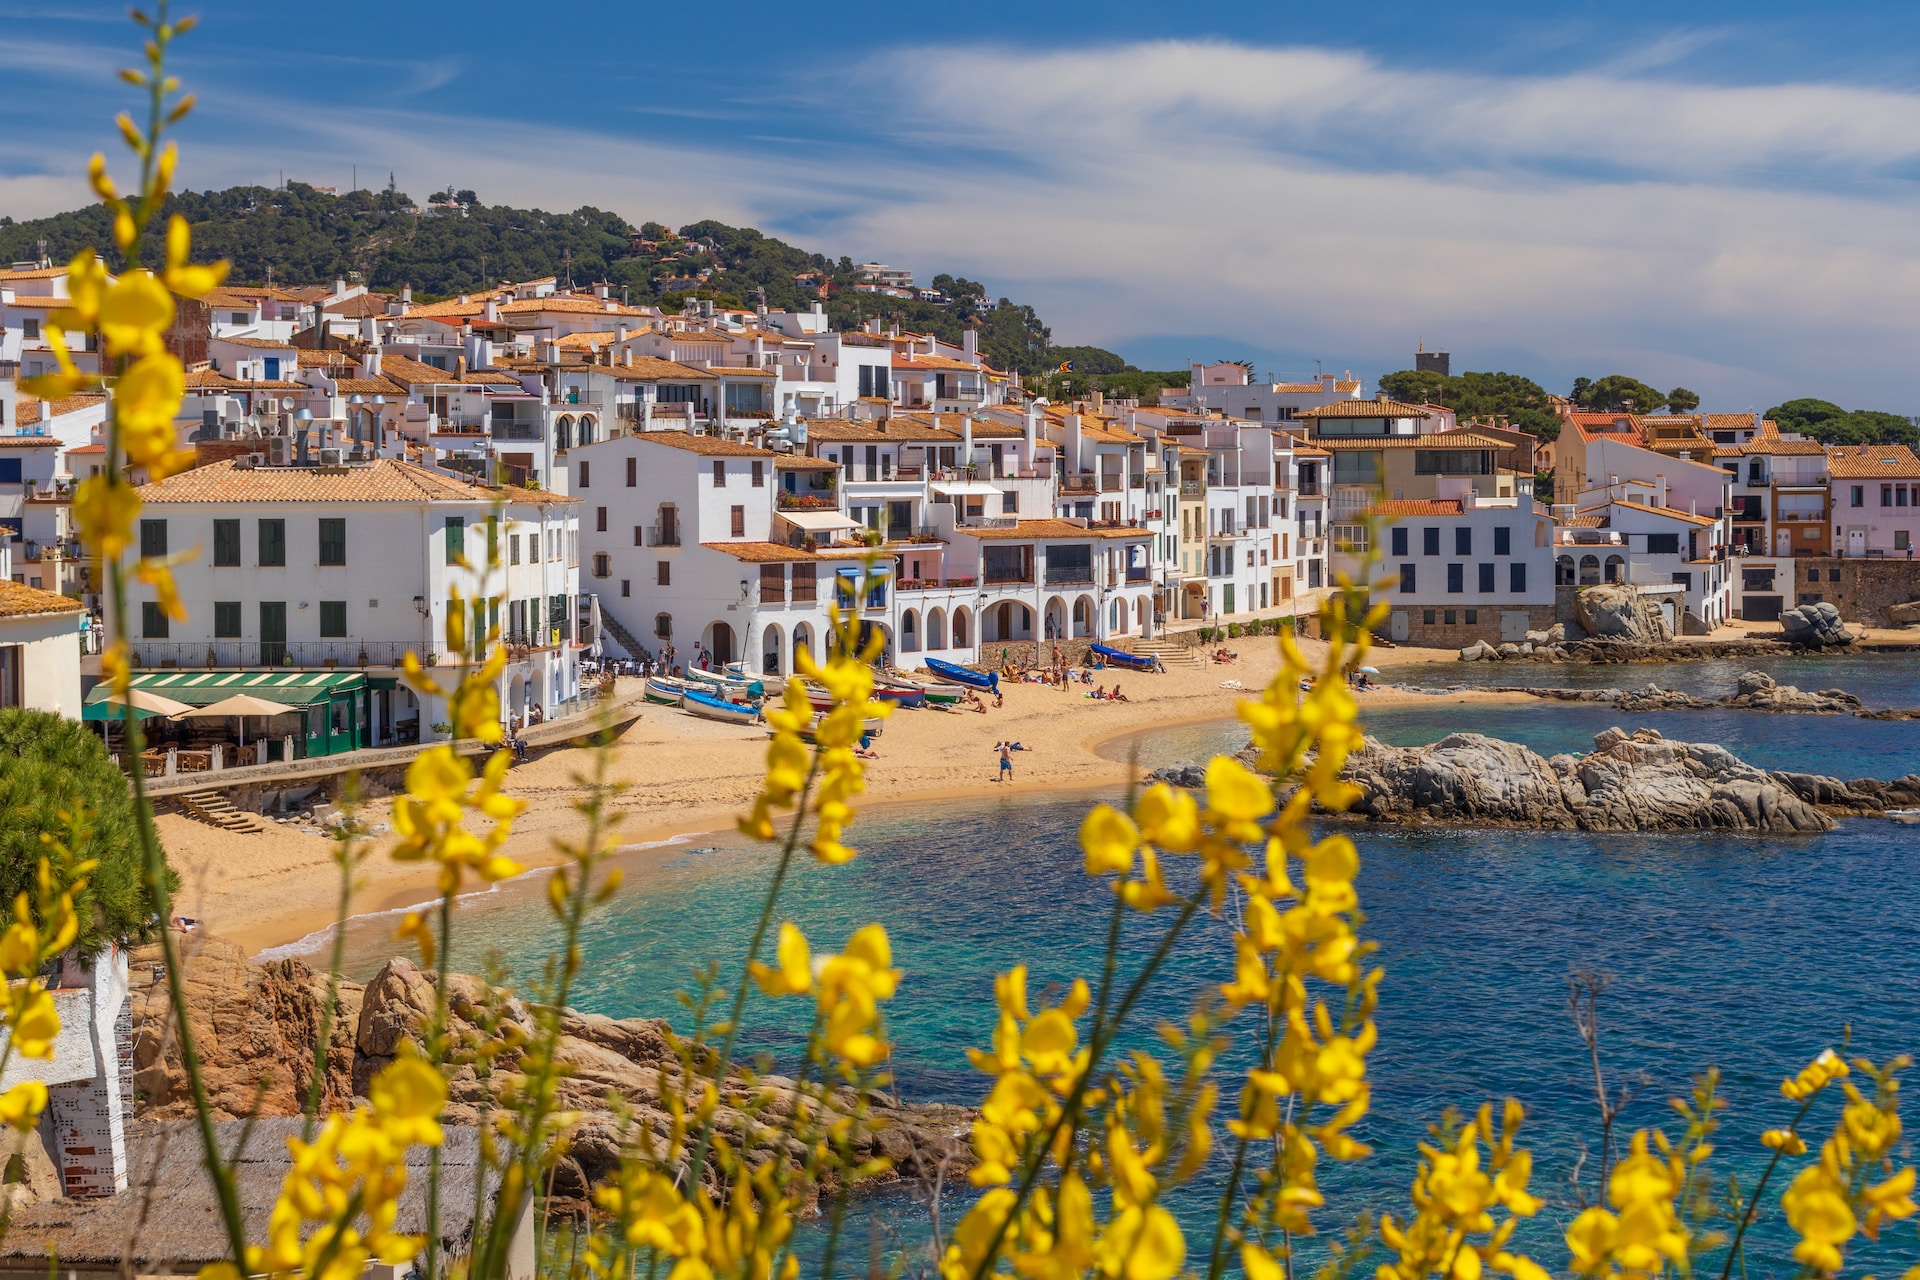 Buying an apartment in Spain: What are the main reasons to buy an apartment in Spain?